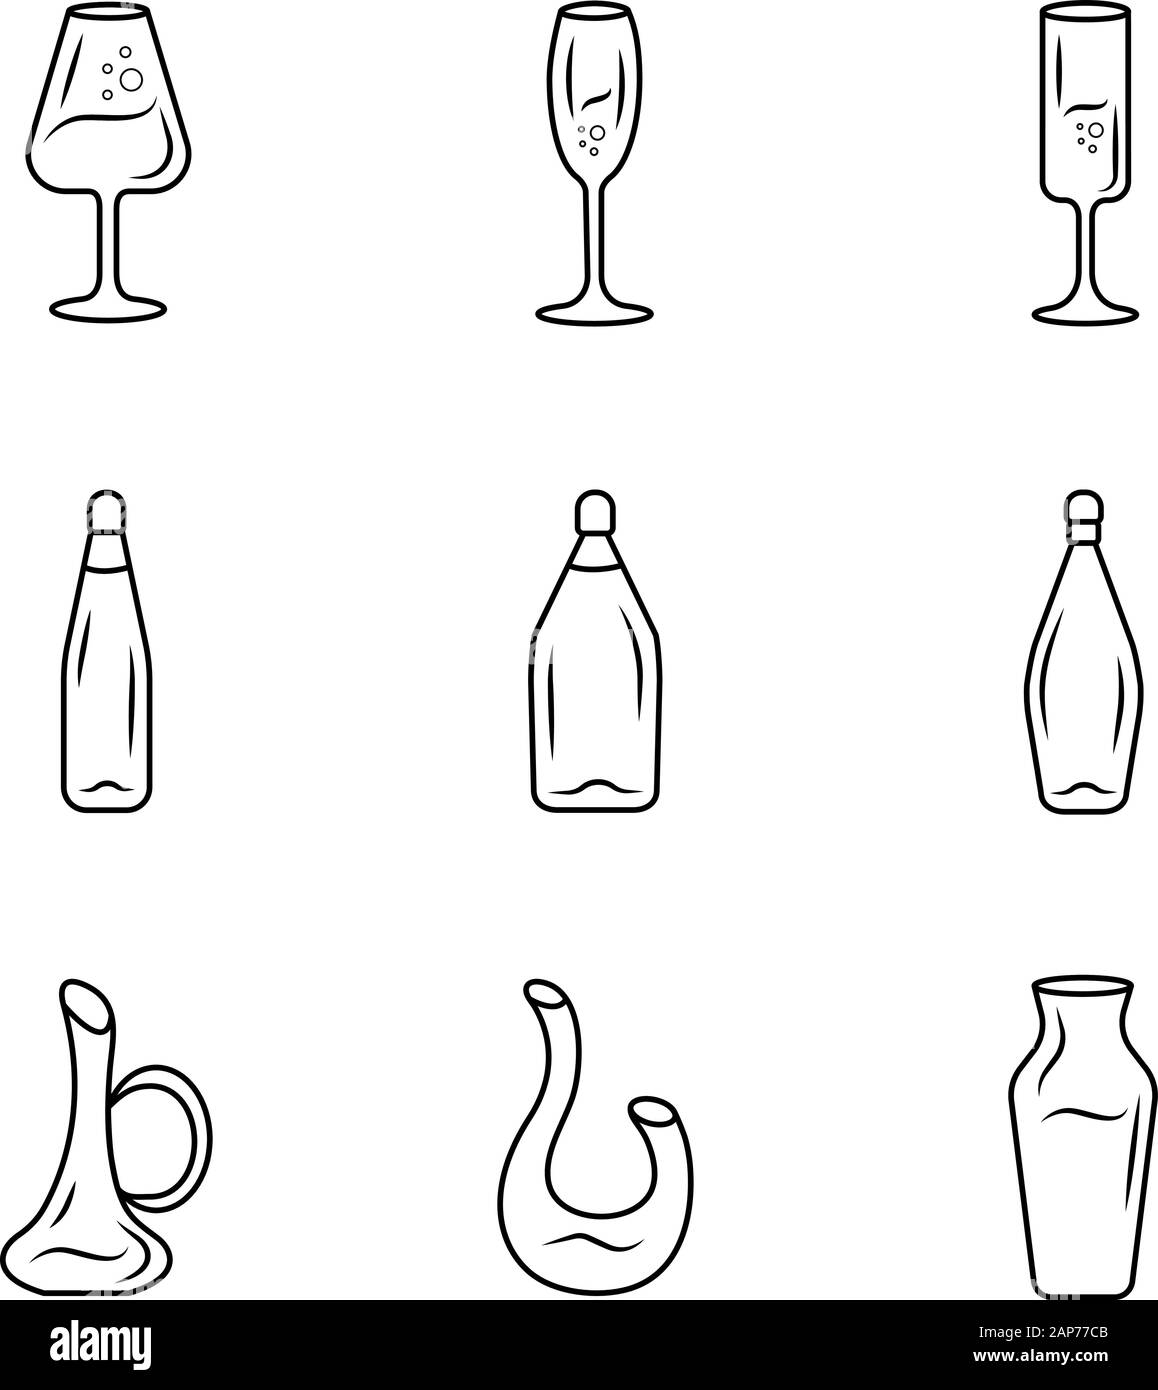 Winery glassware linear icons set. Party, bar, restaurant decanters, bottles, glasses thin line contour symbols. Types of wine. Isolated vector outlin Stock Vector